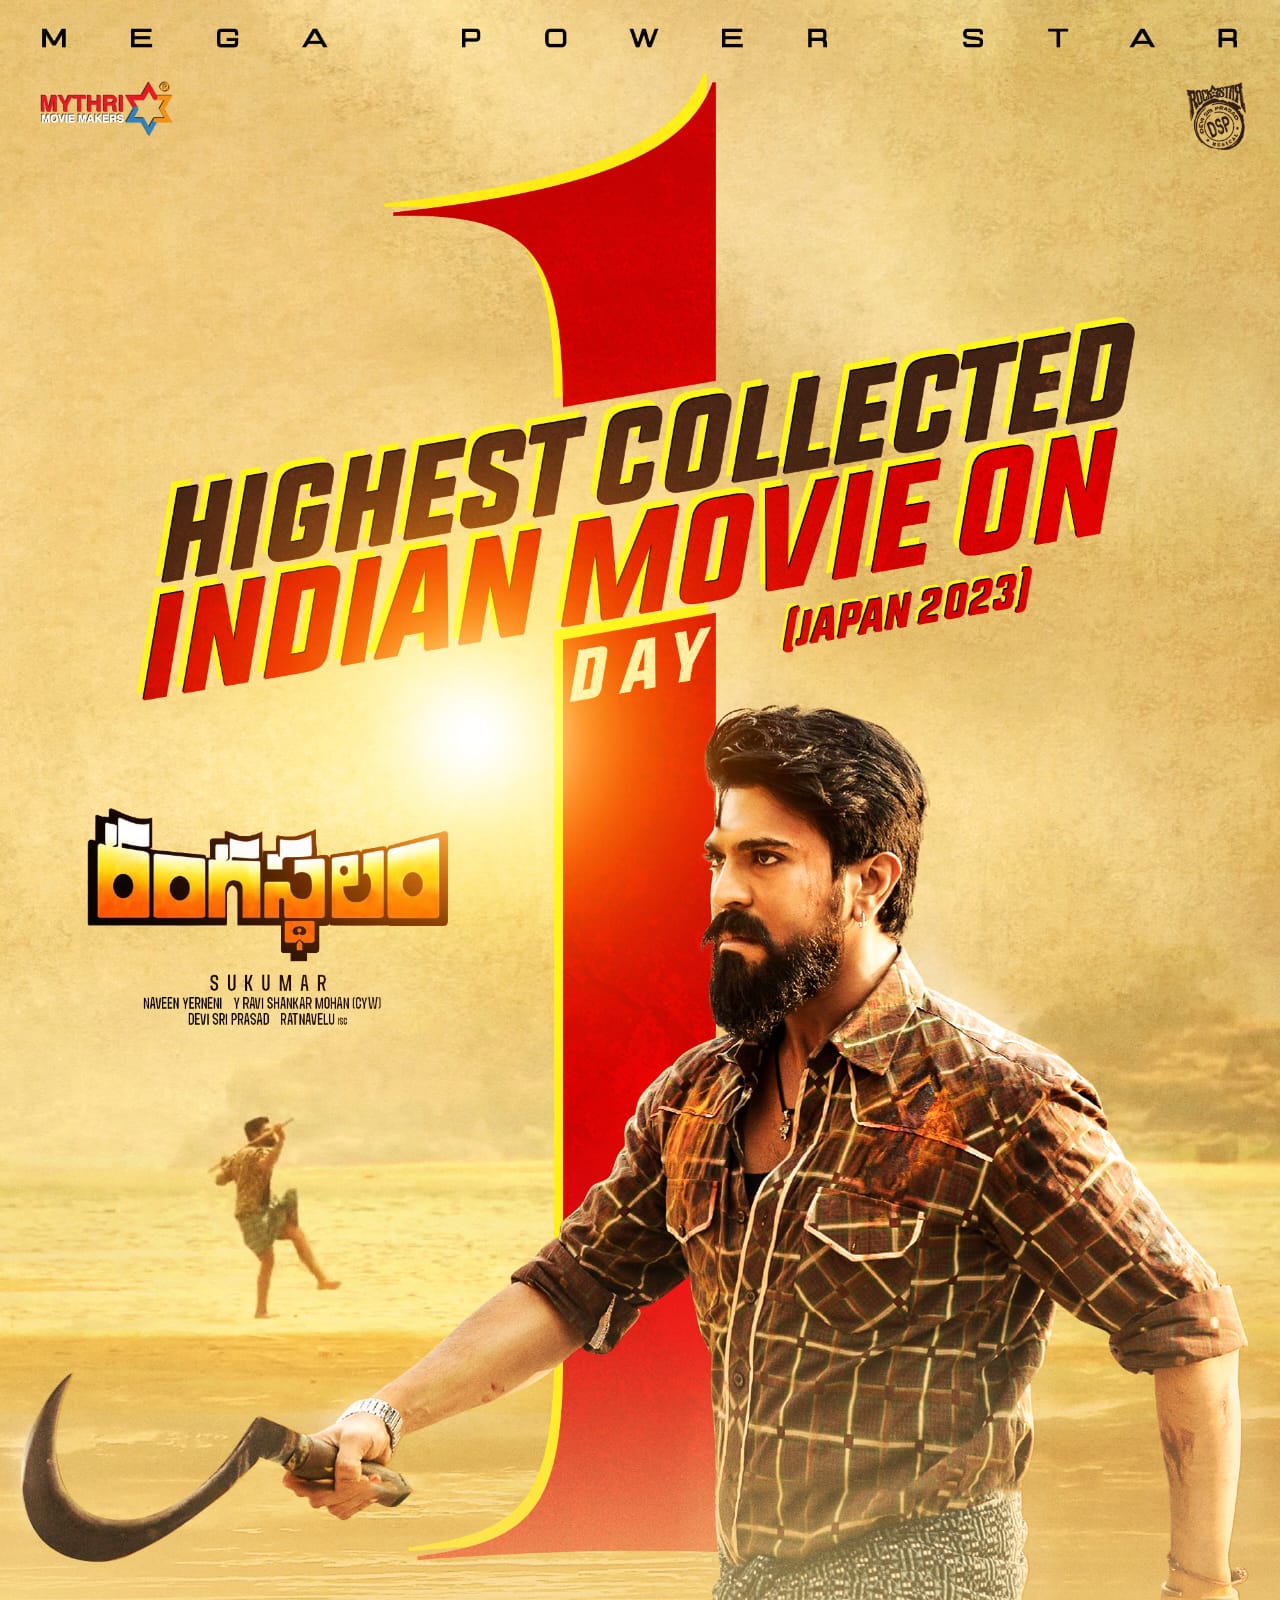 Ram Charan's Rangasthalam breaks all records with its Japan Release- Nets 2.5 million yen in 70 screens on Day 1 !